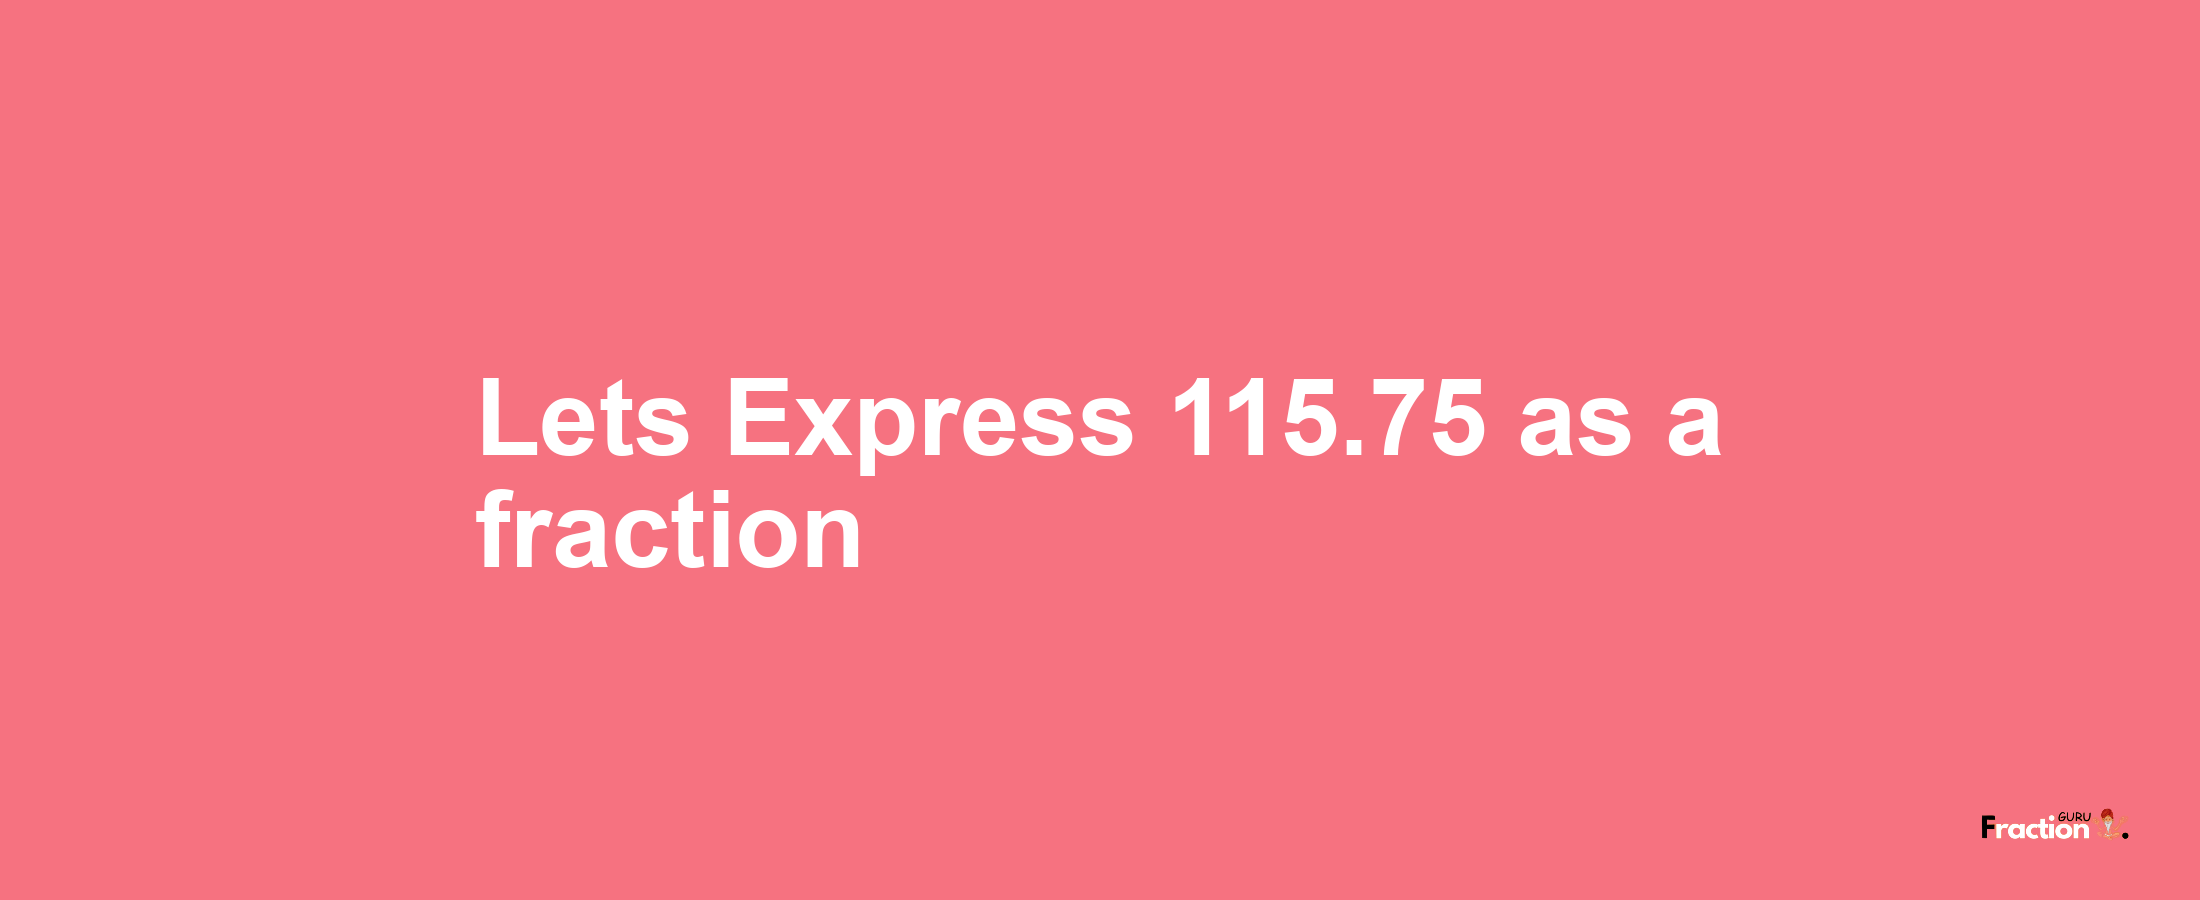 Lets Express 115.75 as afraction